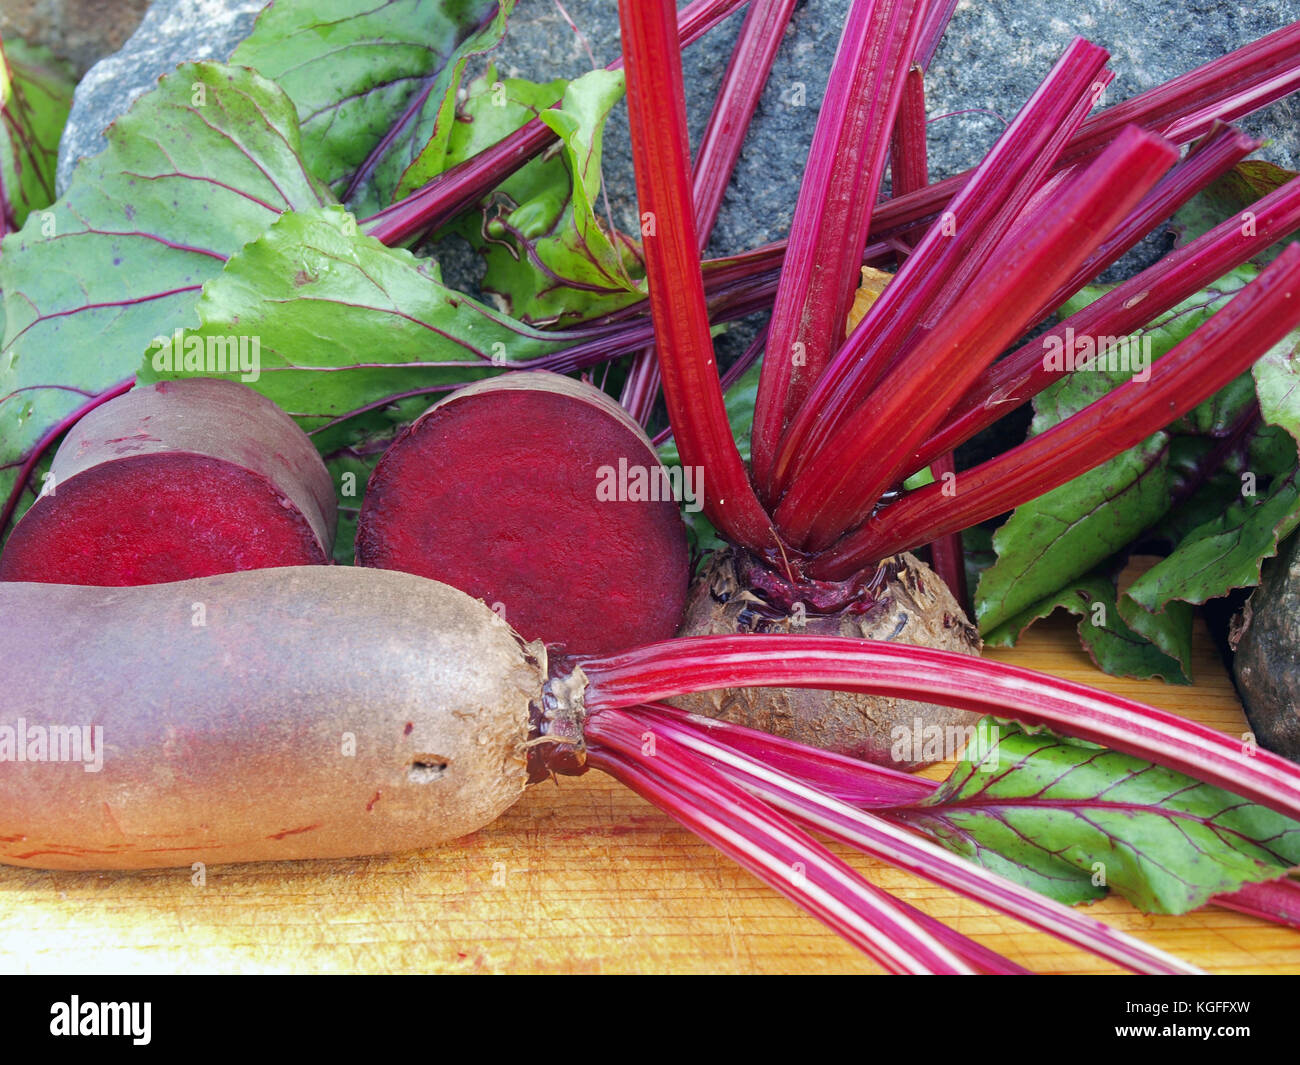 Bisected red beets and leaves on wooden board close up. Stock Photo